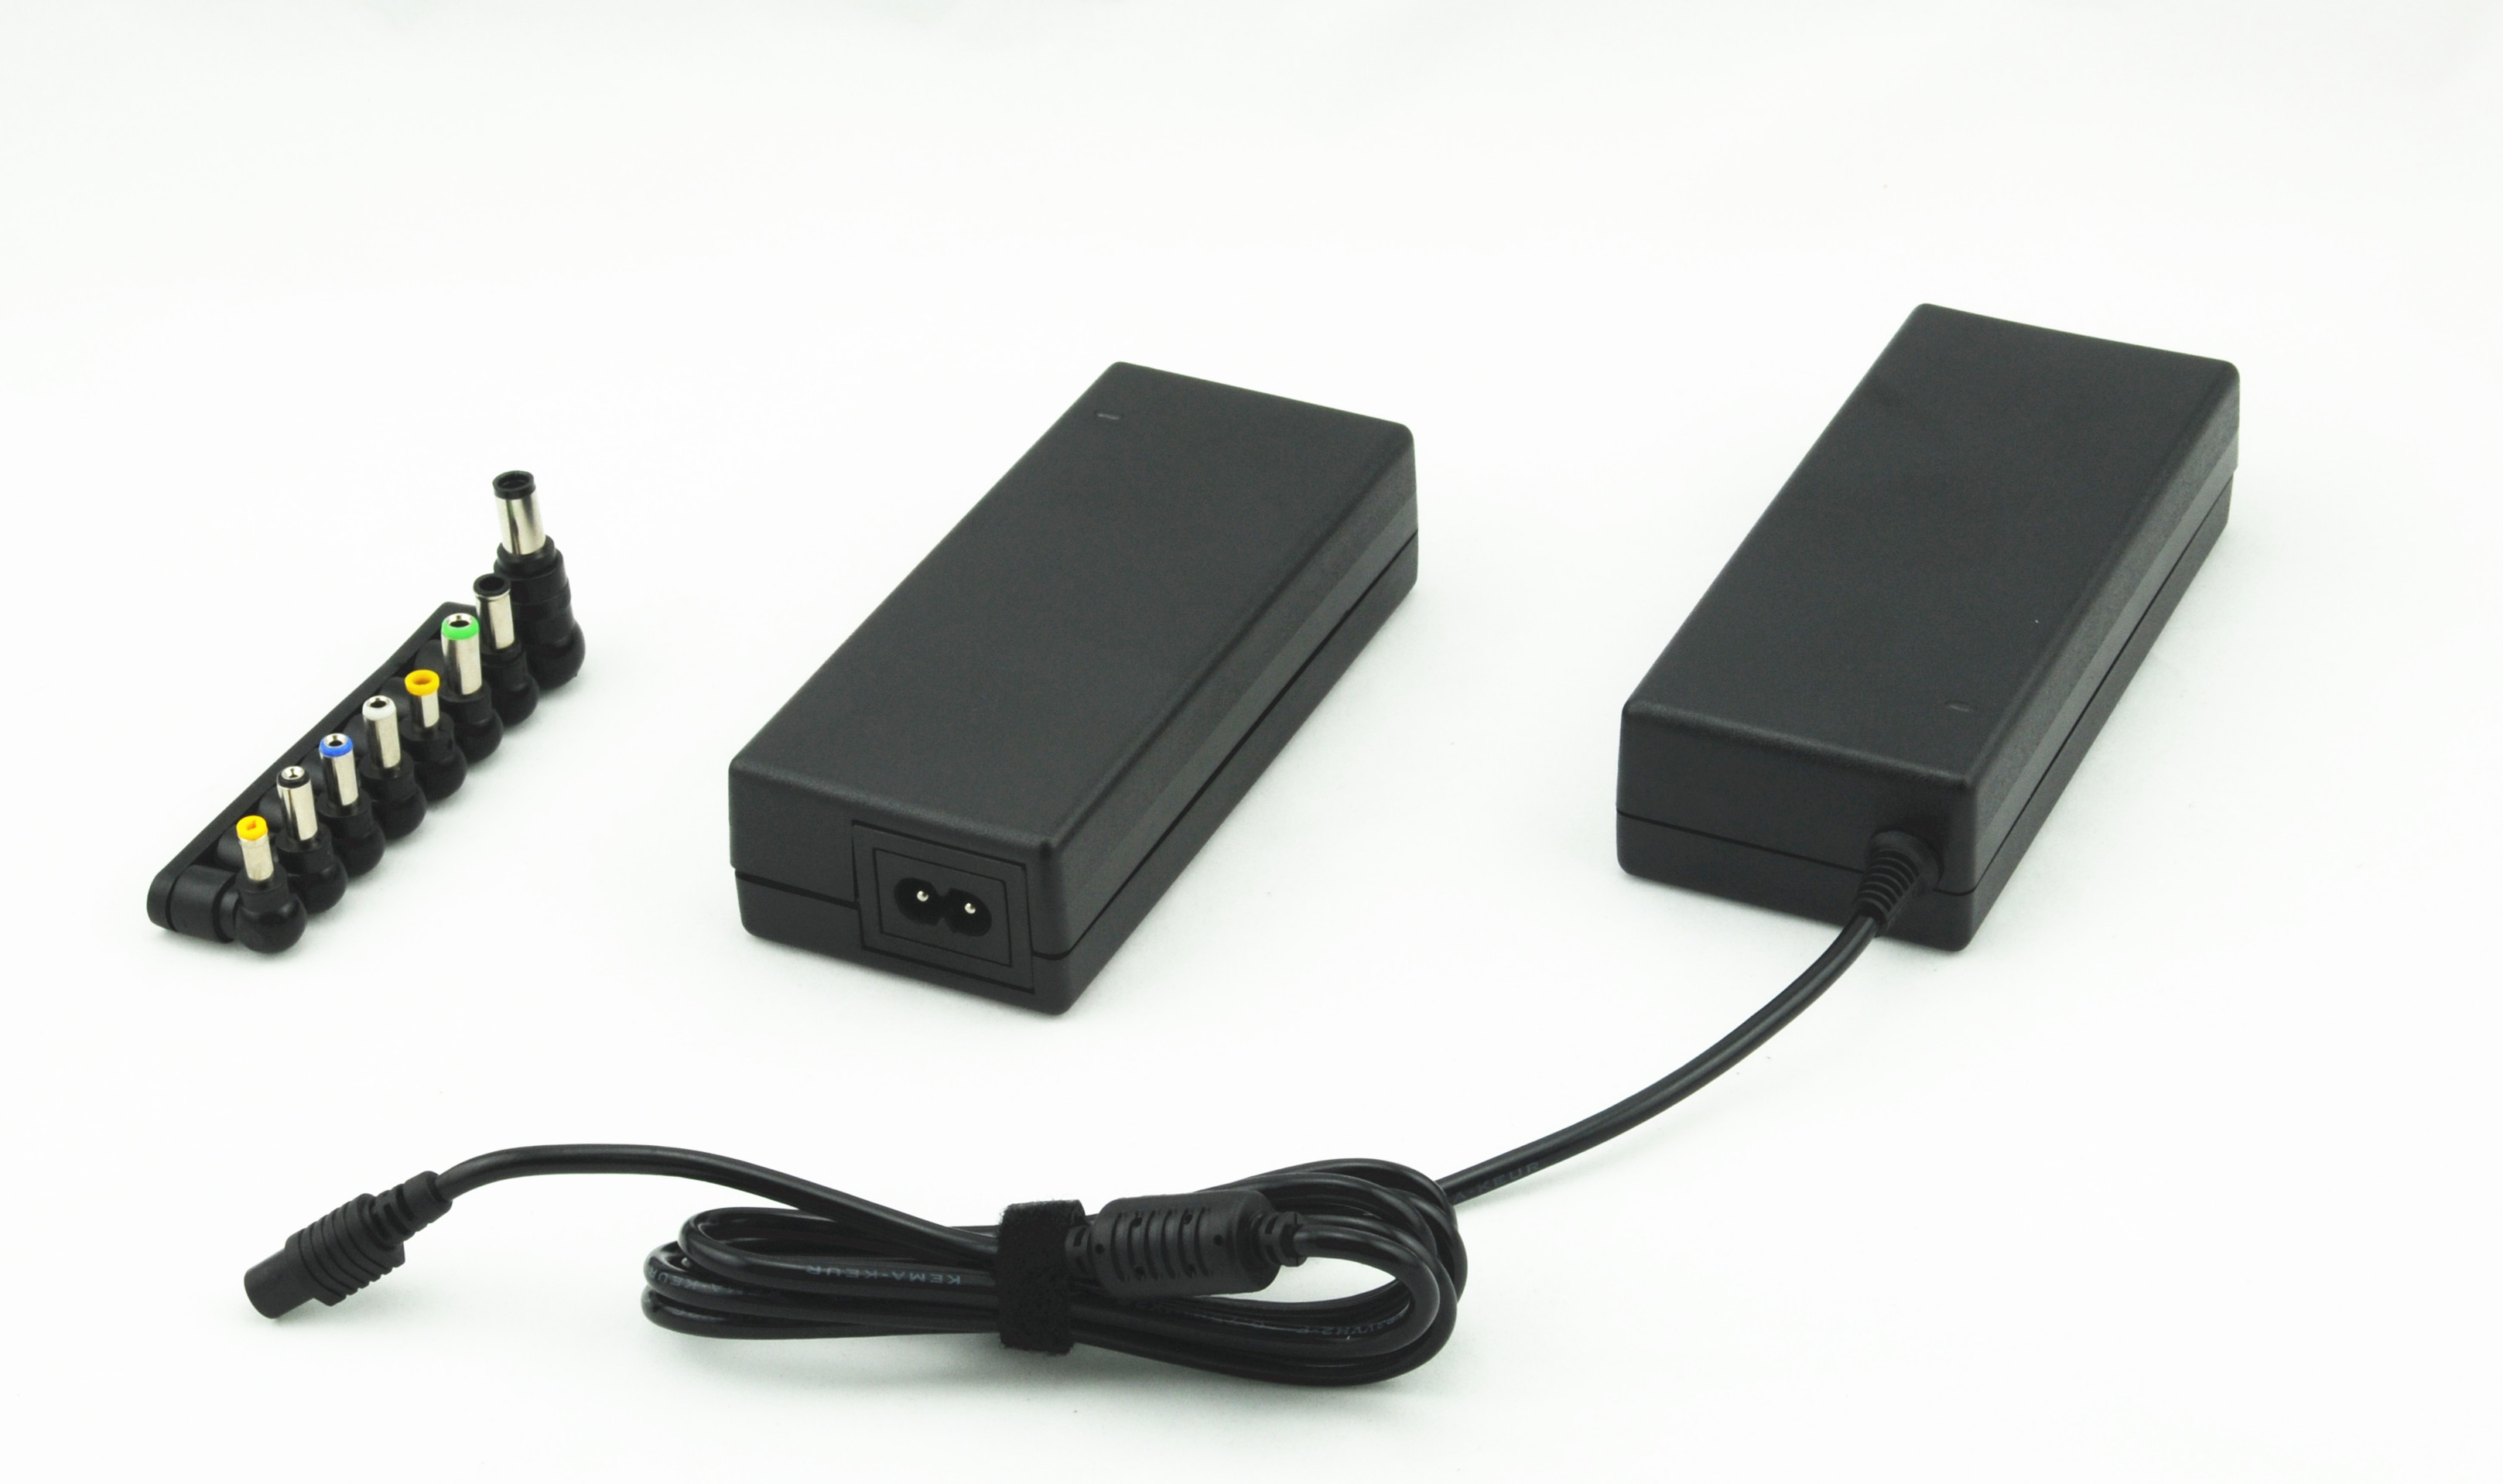 C6 / C8 / C14 Computer Universal Power Adaptor for DELL / HP / ACER